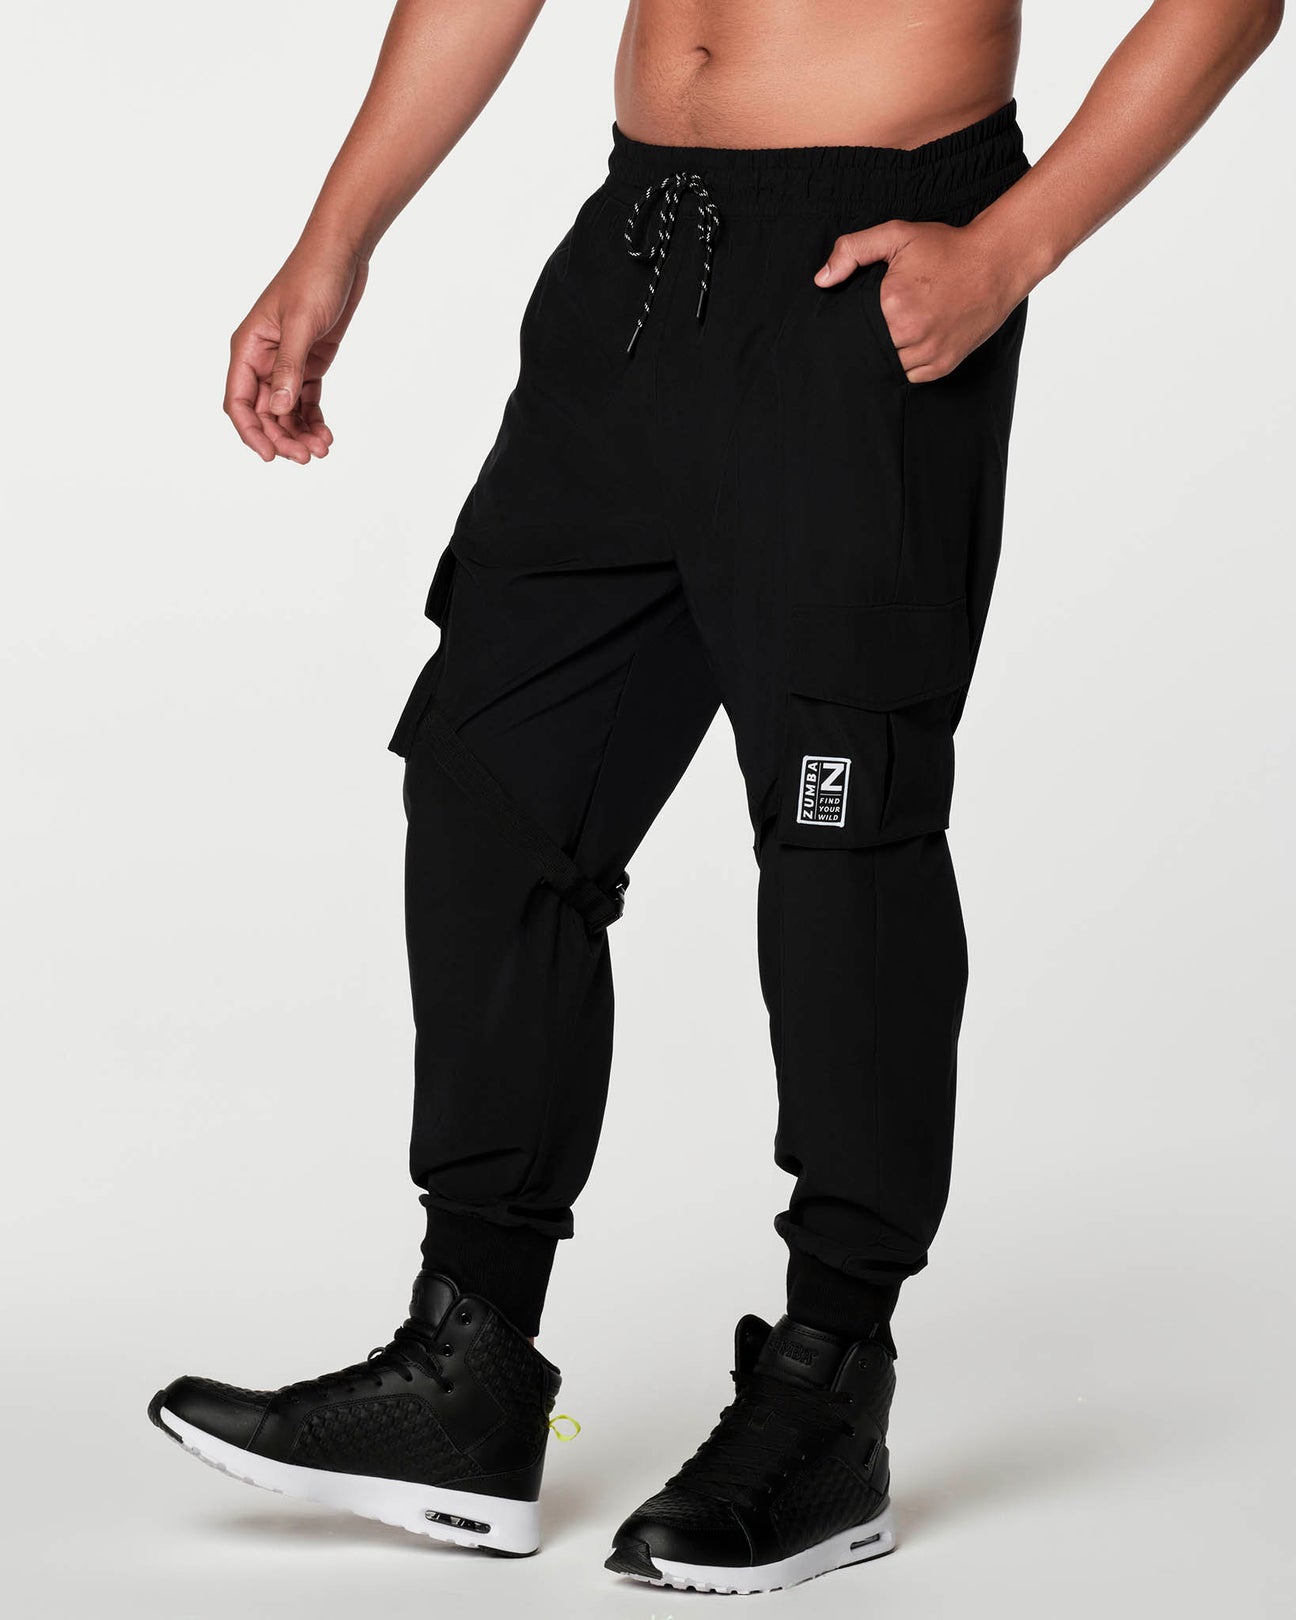 Men's Rubber Cargo Pants With Front Back & Side Pockets